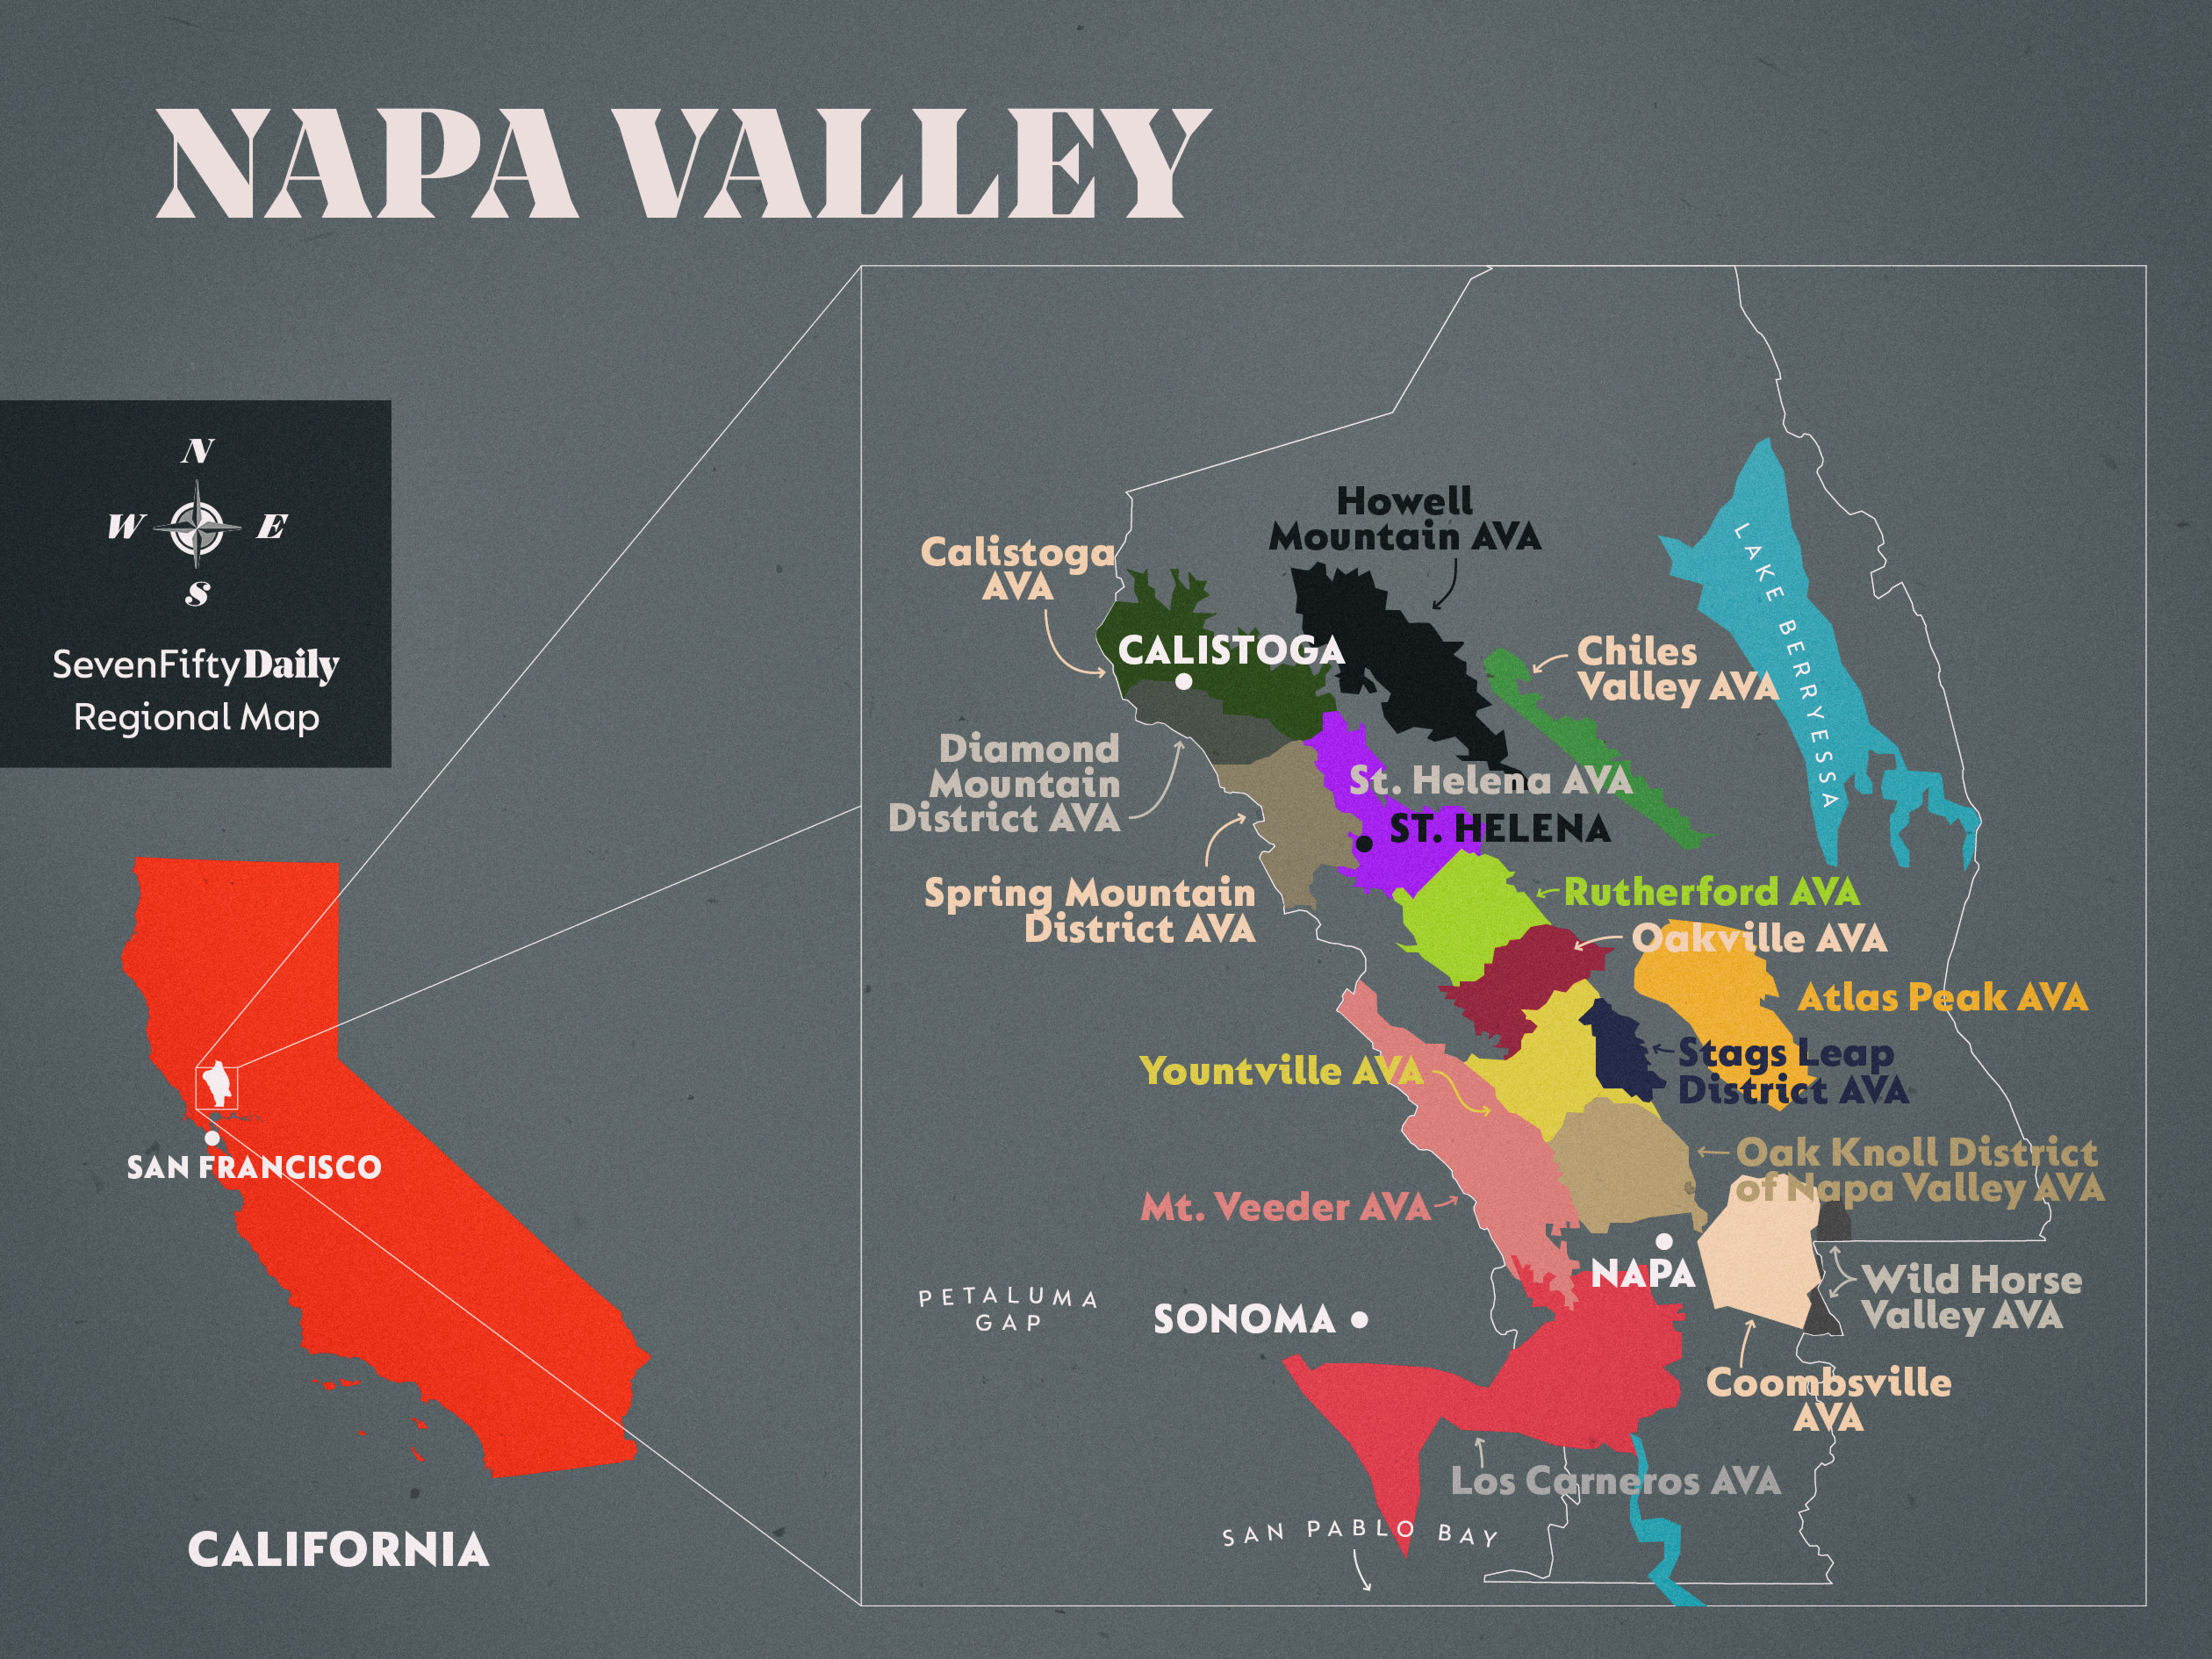 Napa Valley Map Of California New Where Is Yountville California The - Where Is Yountville California On The Map